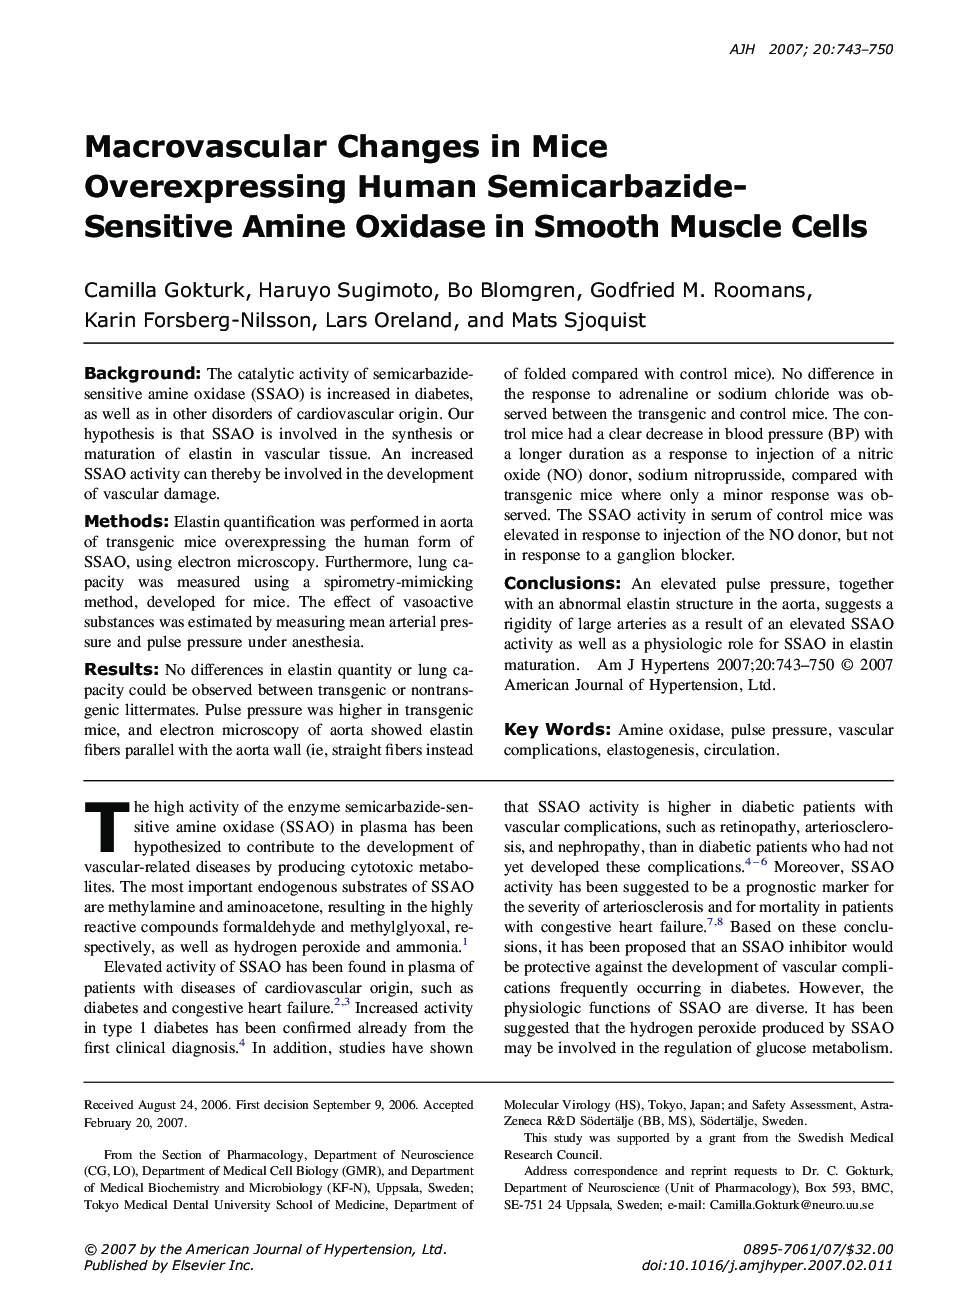 Macrovascular Changes in Mice Overexpressing Human Semicarbazide-Sensitive Amine Oxidase in Smooth Muscle Cells